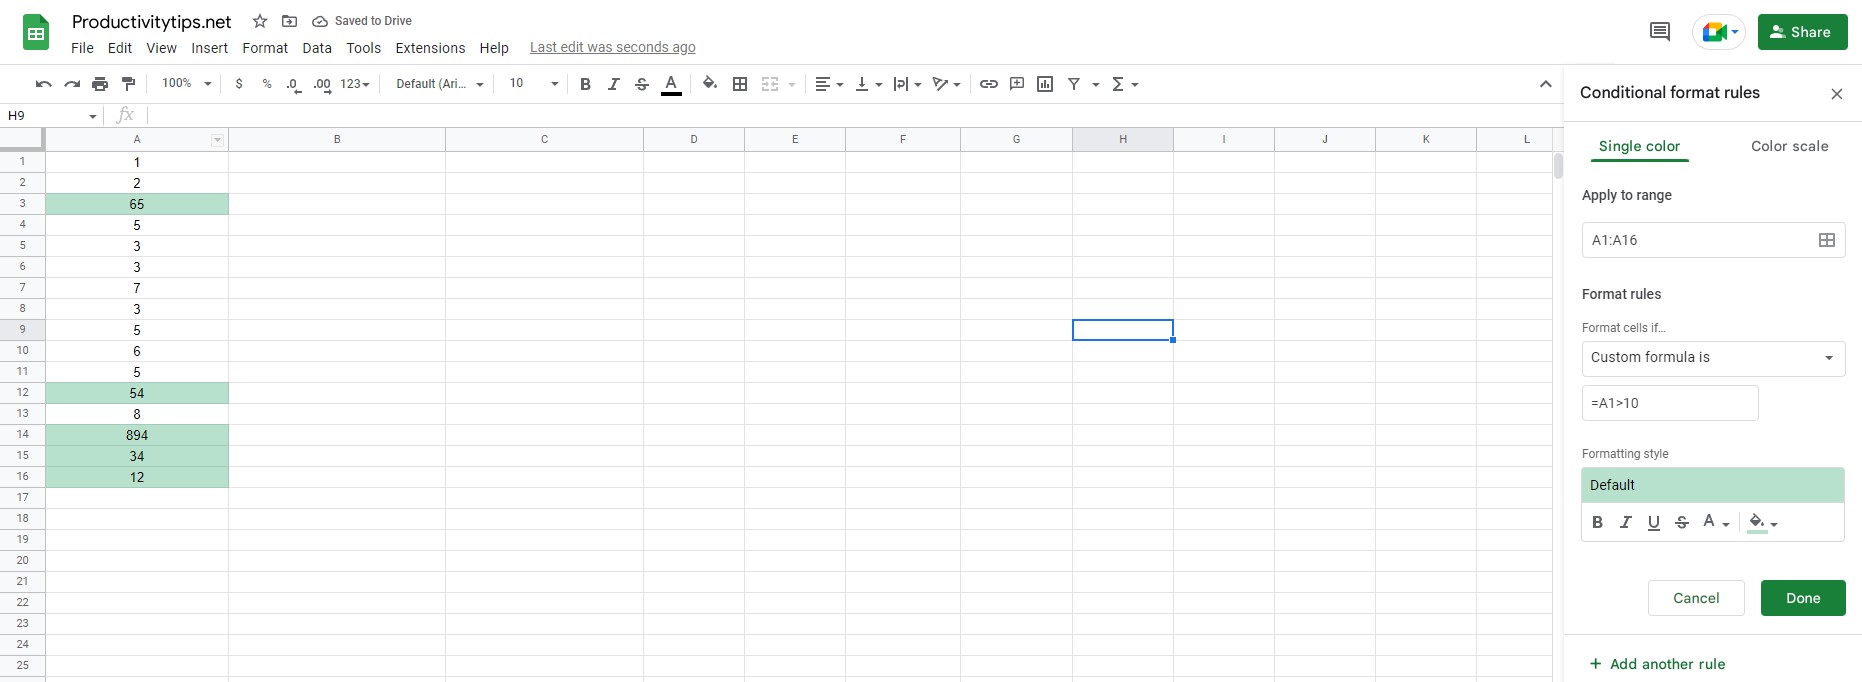 How to Use Google Sheets Conditional Formatting Based on Another Column?